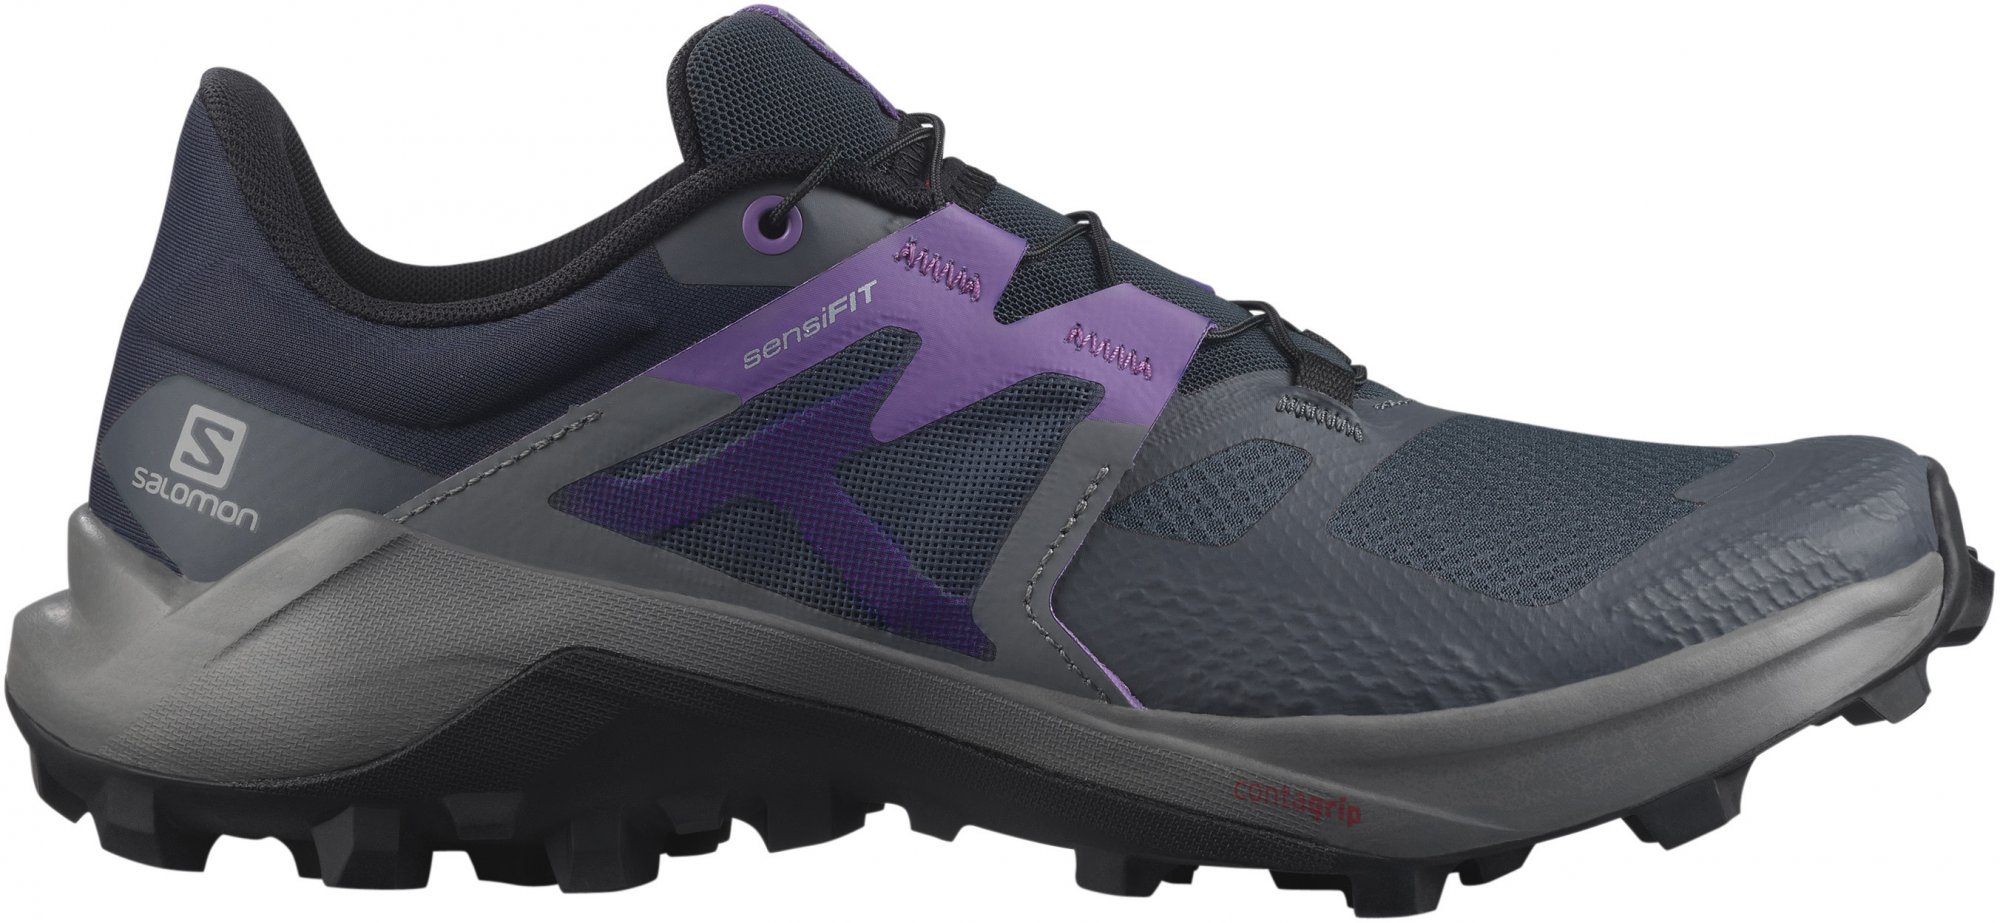 SALOMON WILDCROSS 2 W India Ink/Quiet Shade/Royal Lilac NEW